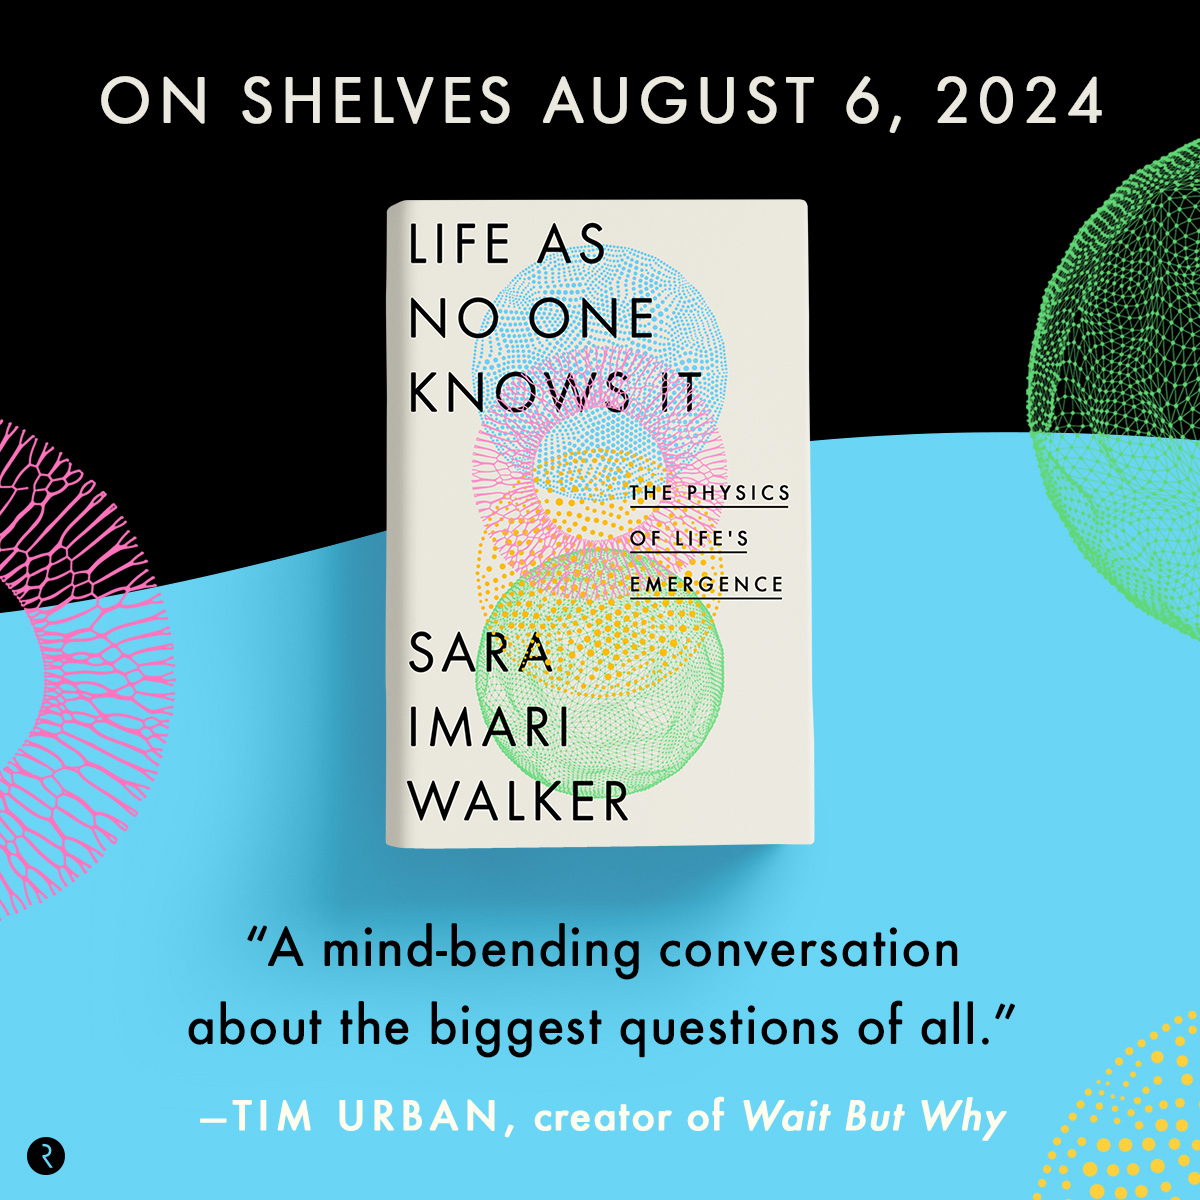 I'm so happy to share that my debut book, LIFE AS NO ONE KNOWS IT, comes out August 6th, 2024 from @riverheadbooks! Read more about it here: bit.ly/3QN0Nop